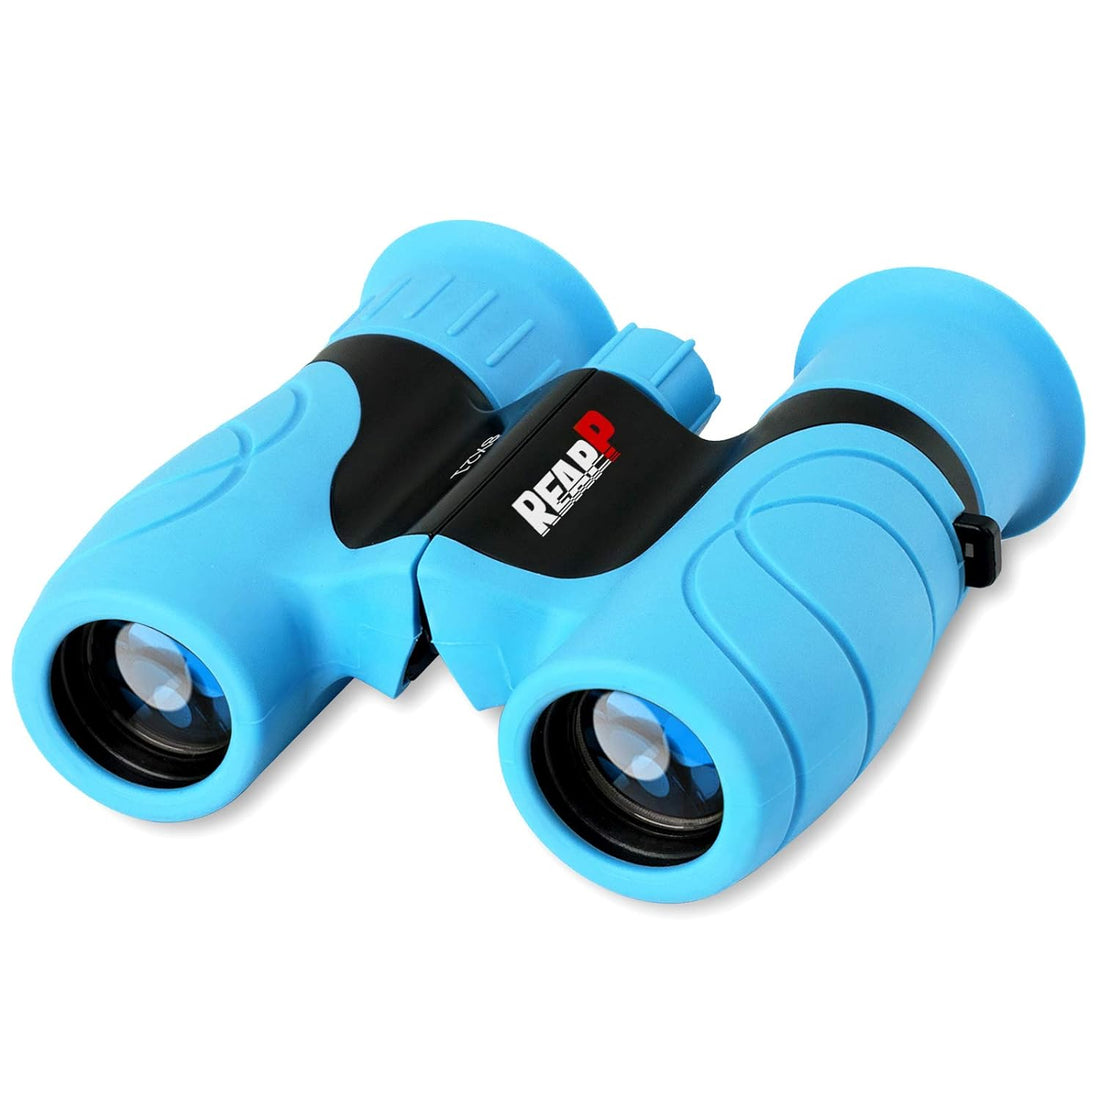 Binoculars for Kids High-Resolution 8x21, Gift for Boys & Girls Shockproof Compact Kids Binoculars for Bird Watching, Hiking, Camping, Travel, Learning, Spy Games & Exploration